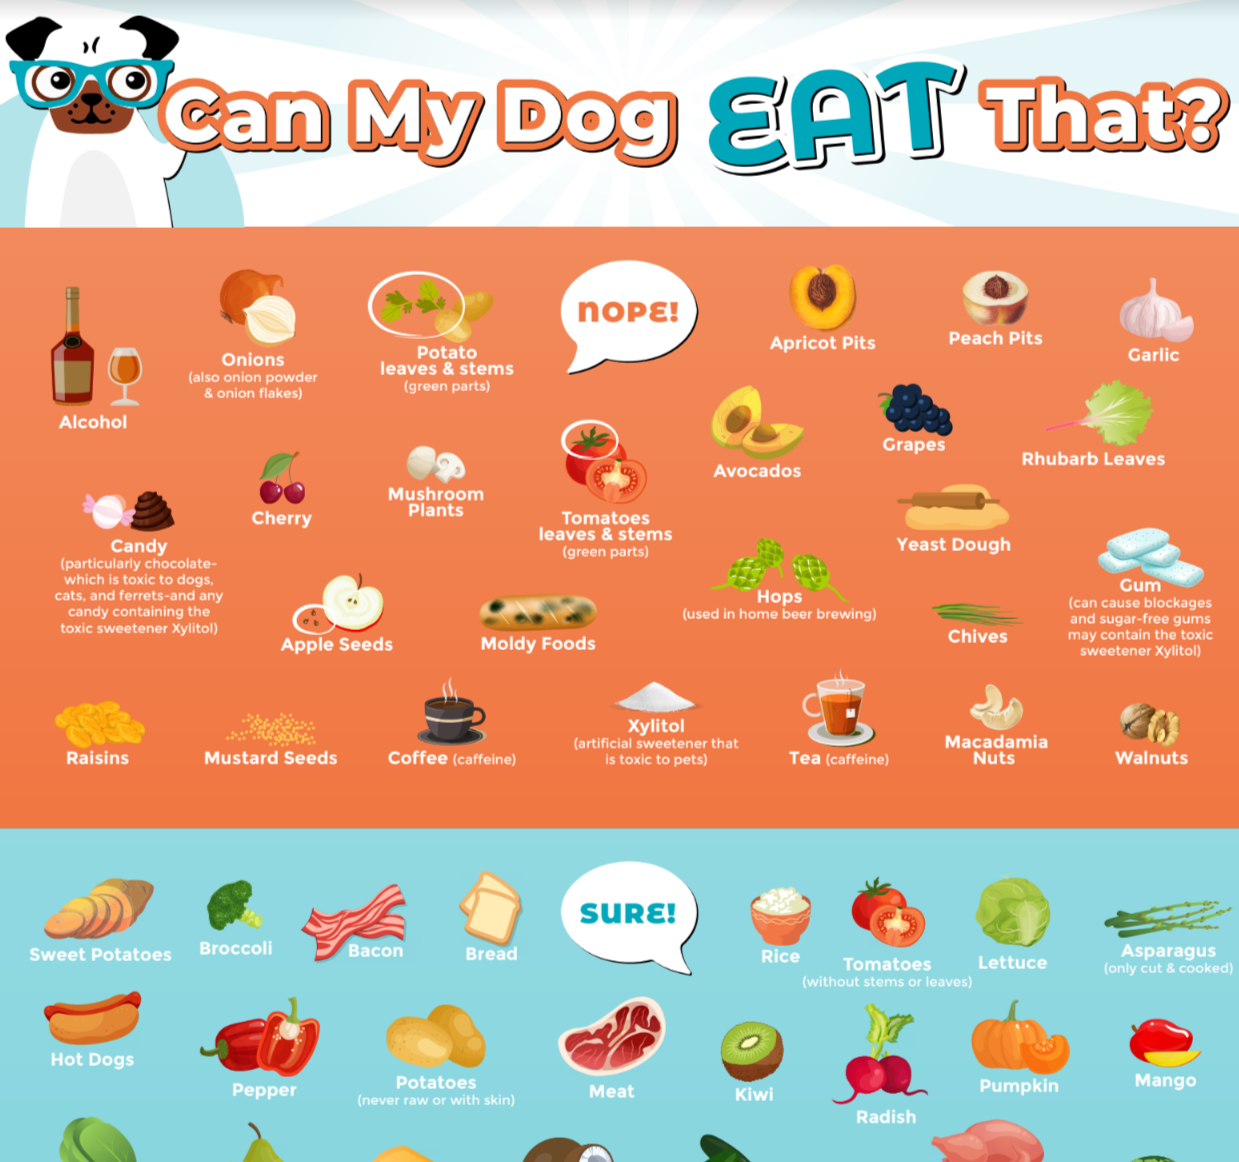 Can My Dog Eat That PDF - ($14.95 Value) FREE